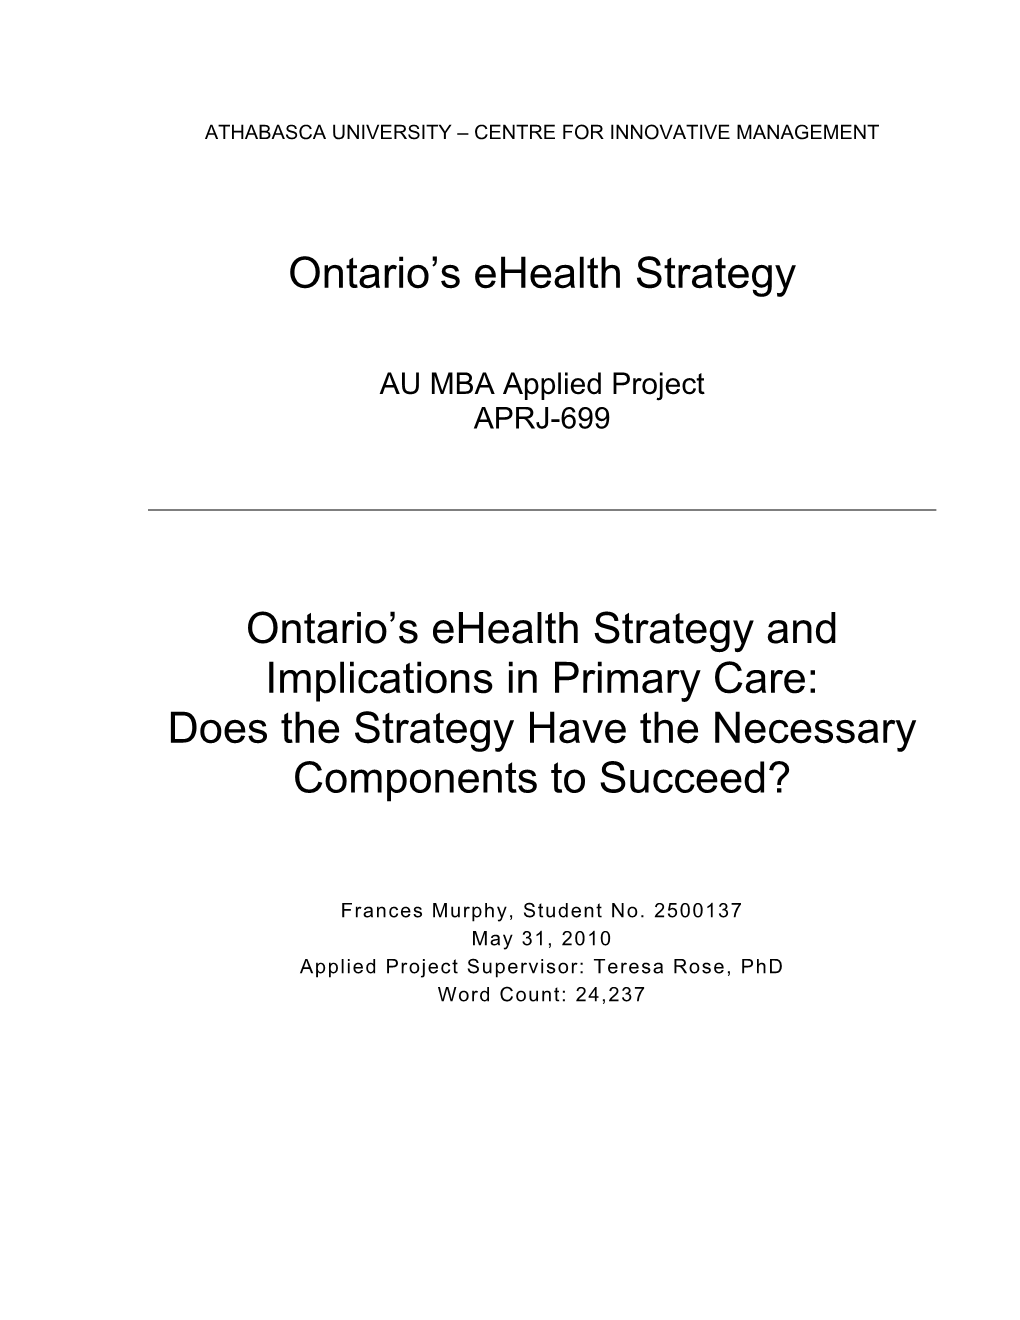 Ontario's Ehealth Strategy and Implications